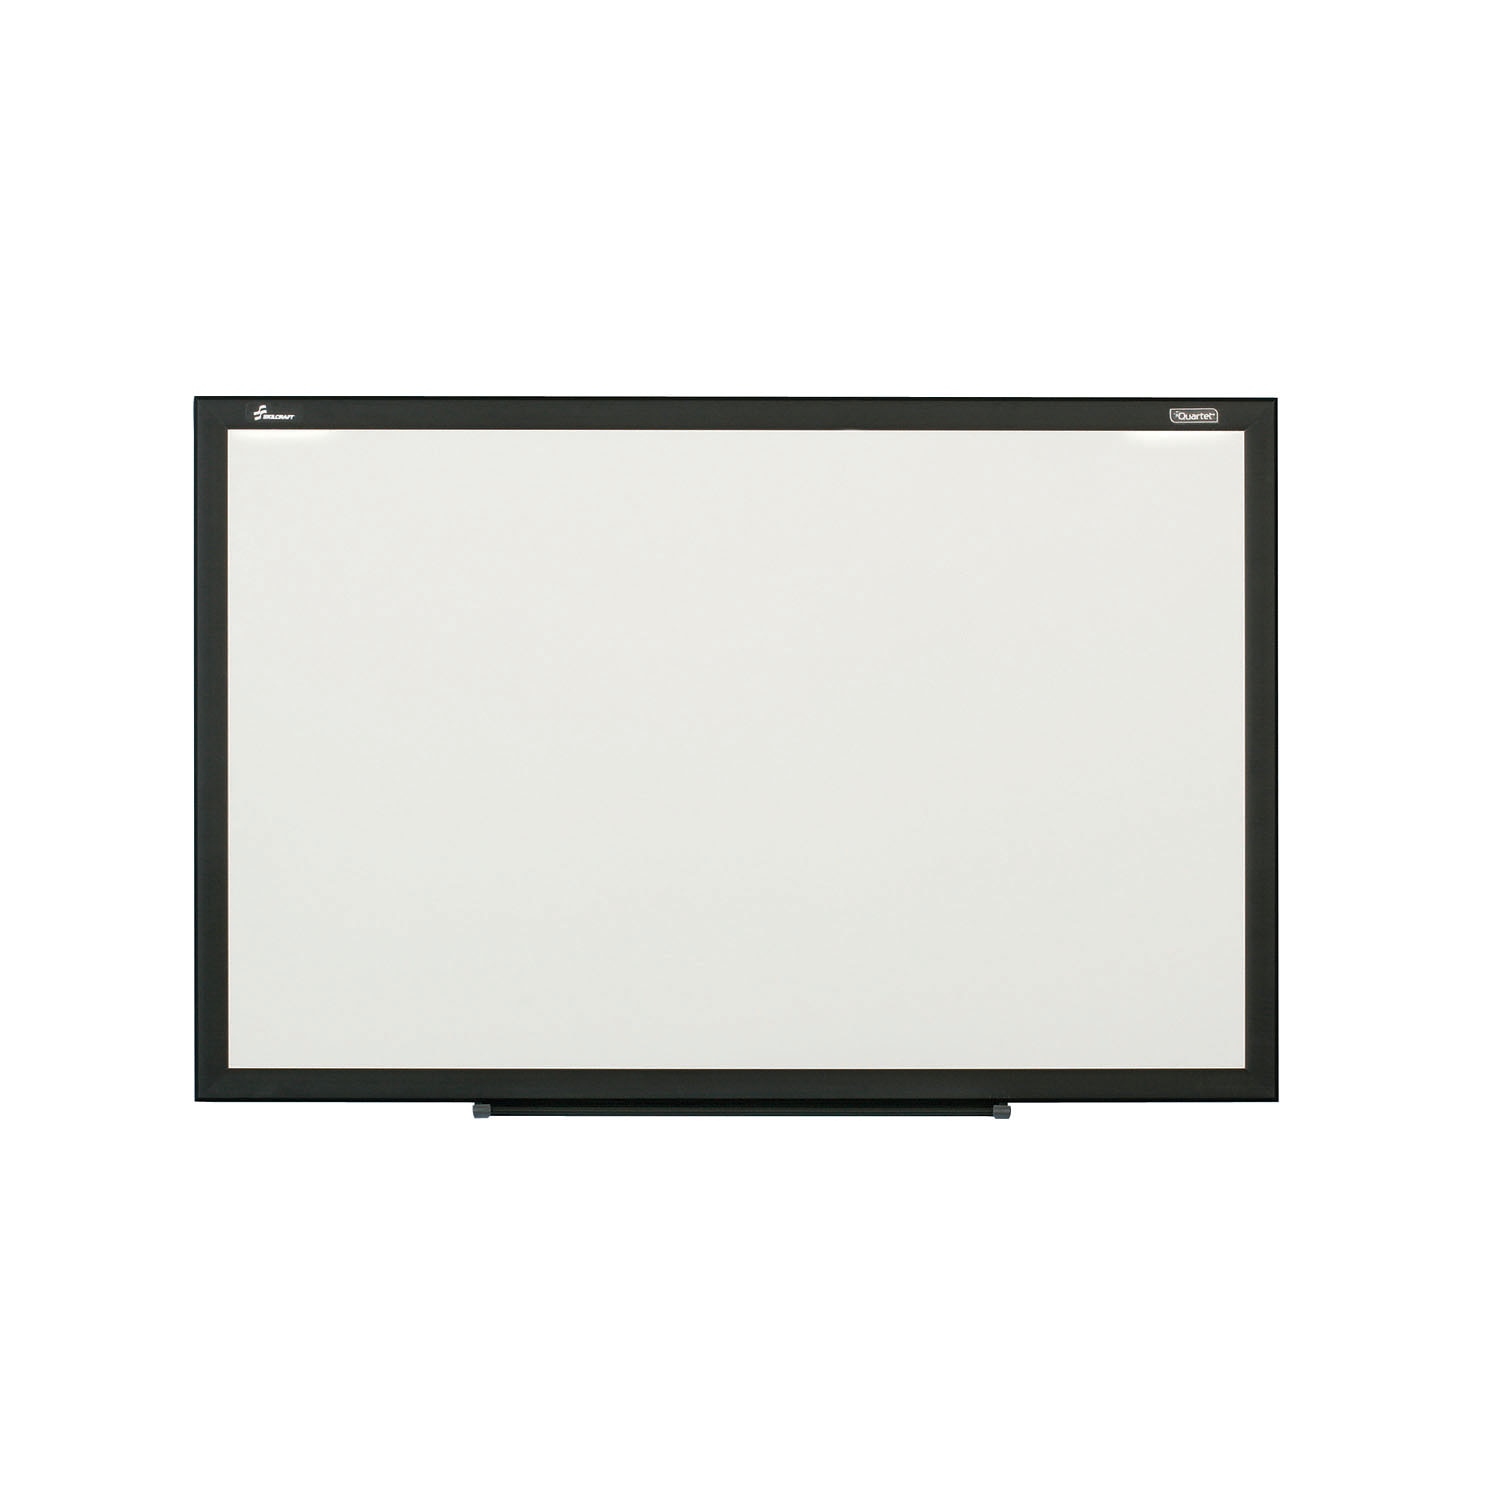 Dry Erase Whiteboard, Magnetic Painted Steel Surface, Black Aluminum Frame, 3 x 2